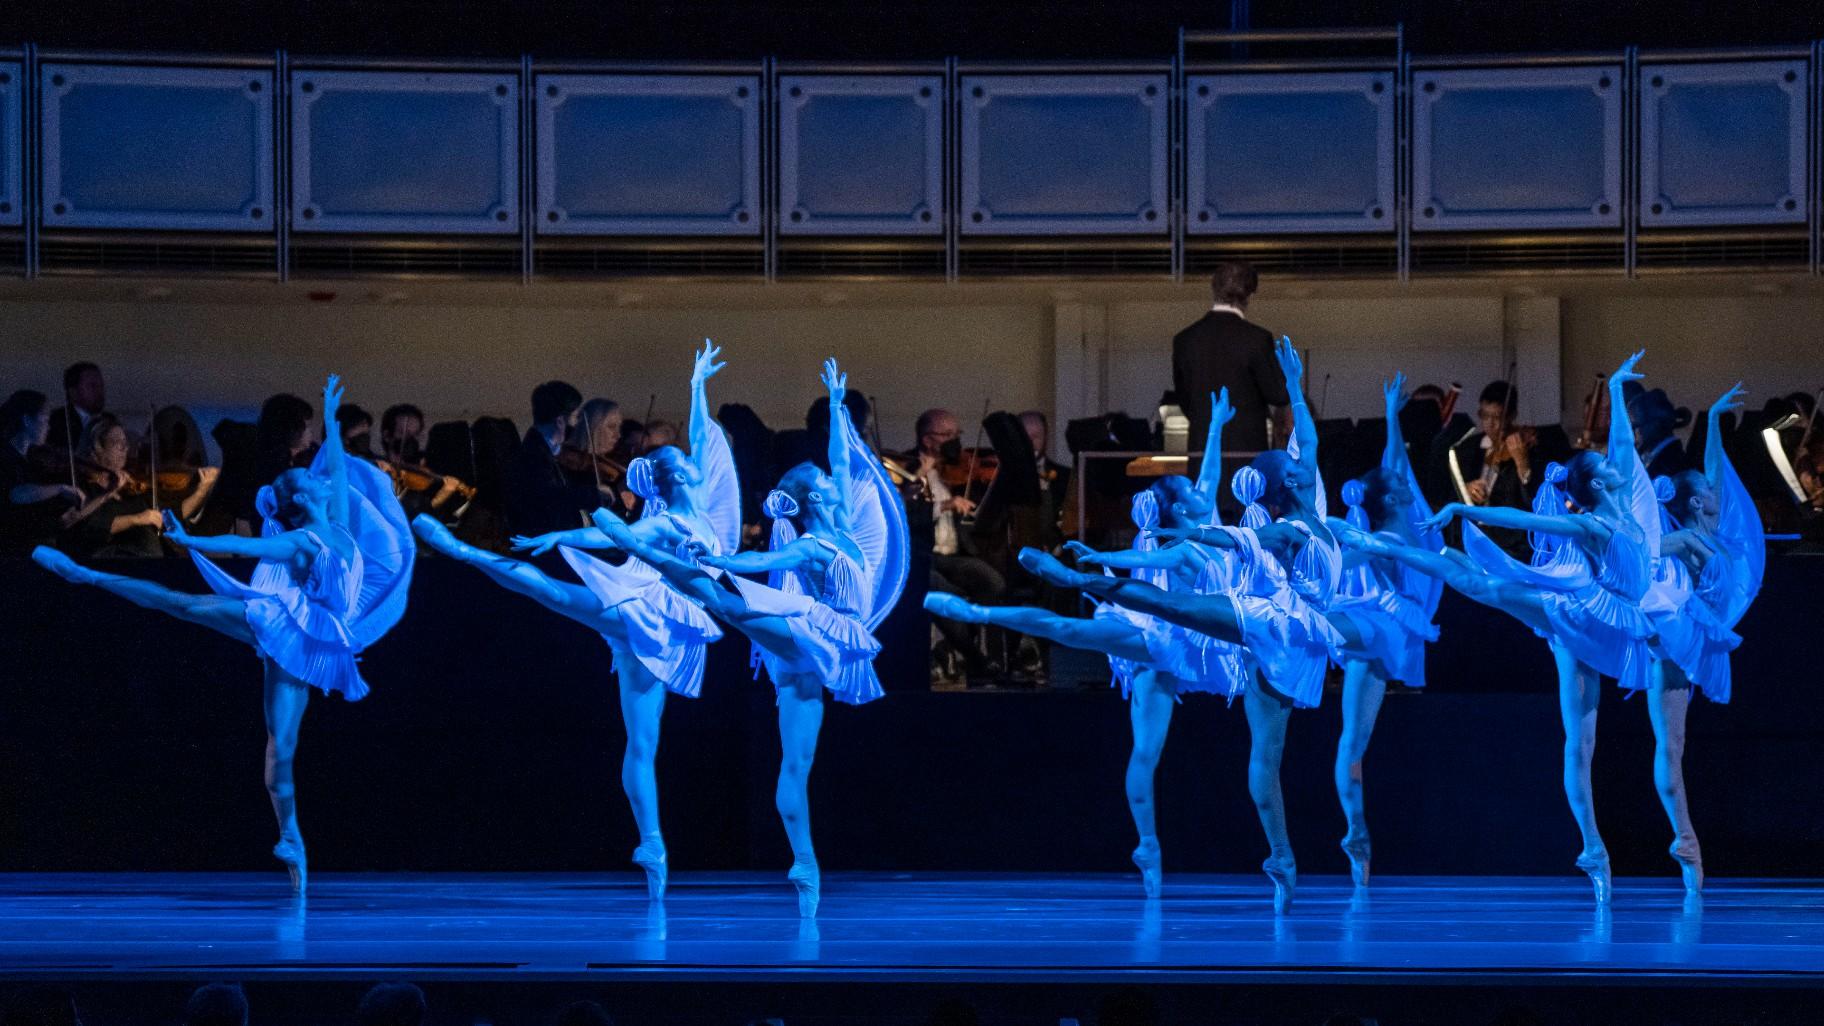 The Joffrey Ballet performs the world premiere of the newly-commissioned “Platée” with choreography by Annabelle Lopez Ochoa set to Rameau’s Suite from Platée performed by the Chicago Symphony Orchestra with conductor Harry Bicket. (Credit: Todd Rosenberg)